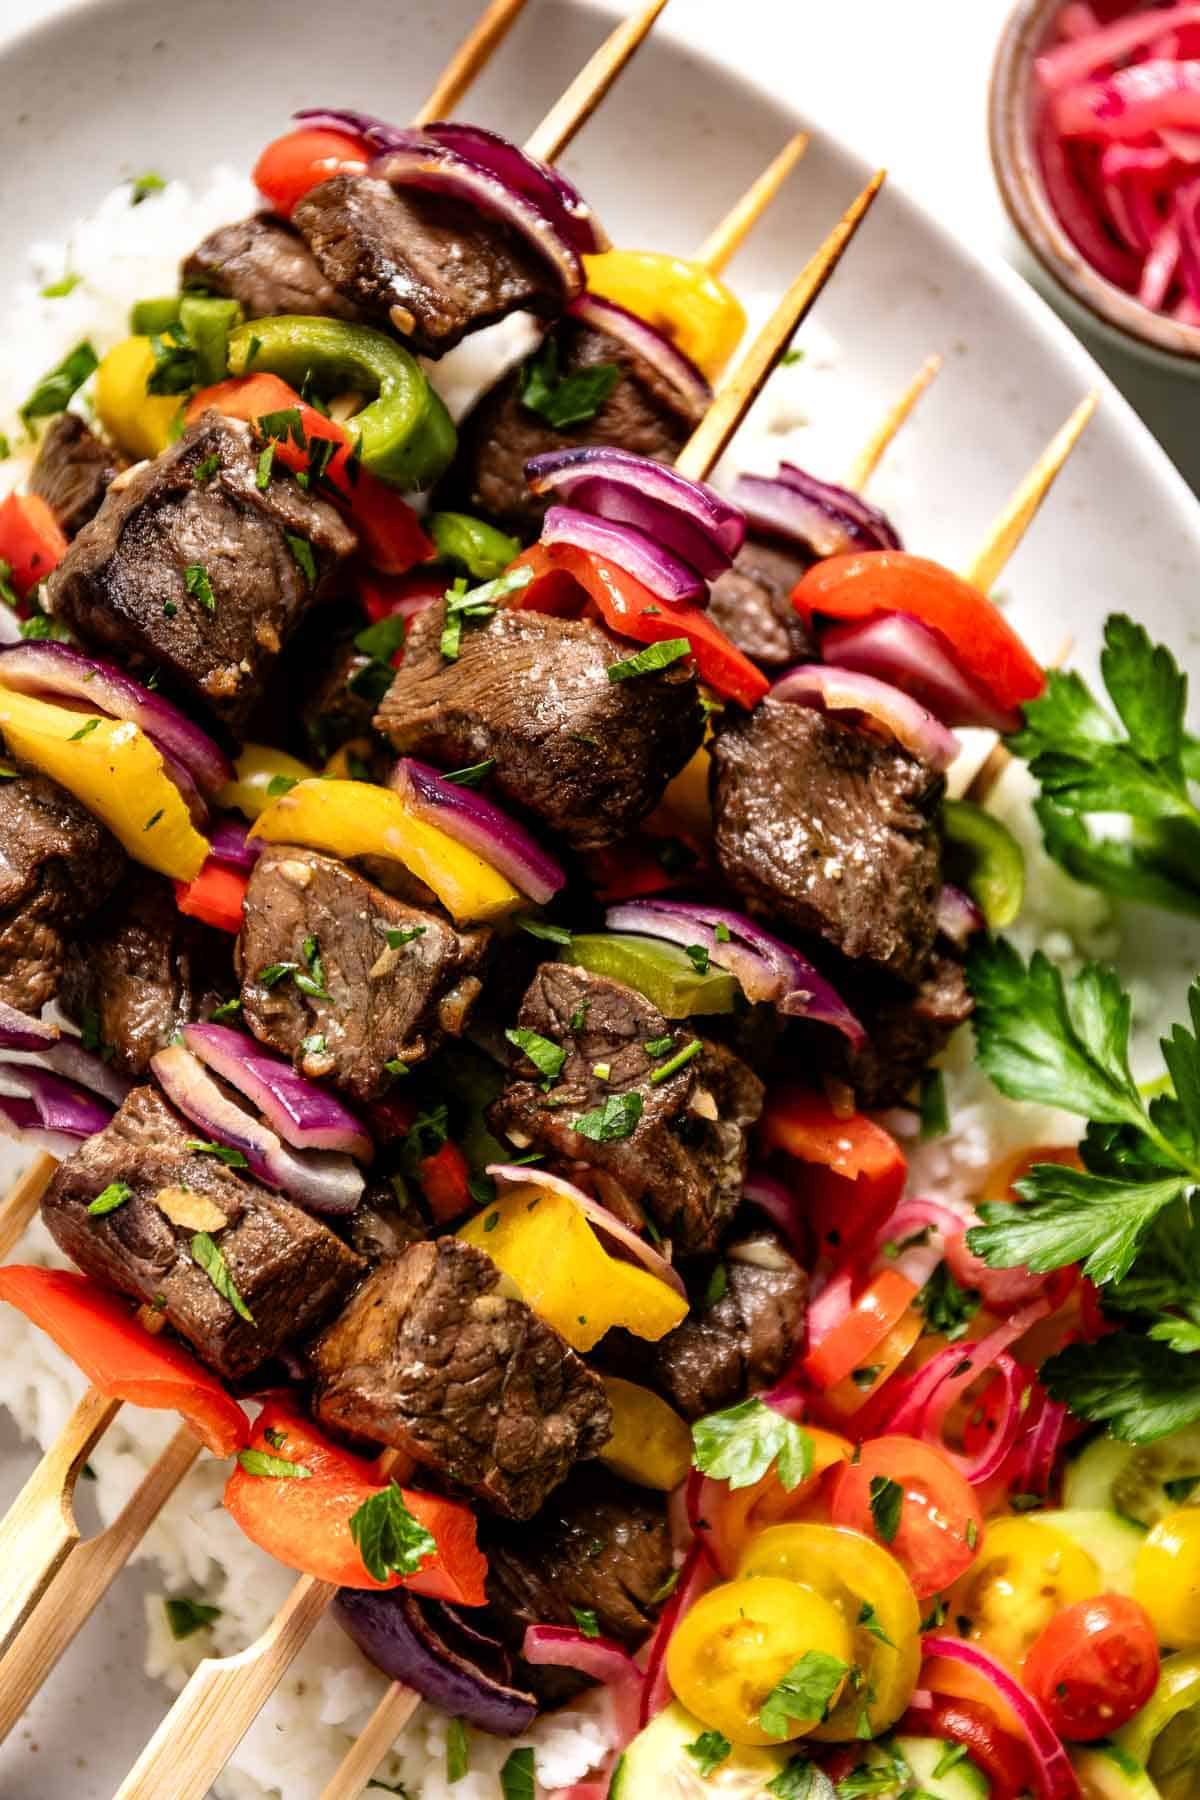 Beef shish kabob skewers on a bed of rice from the top view.